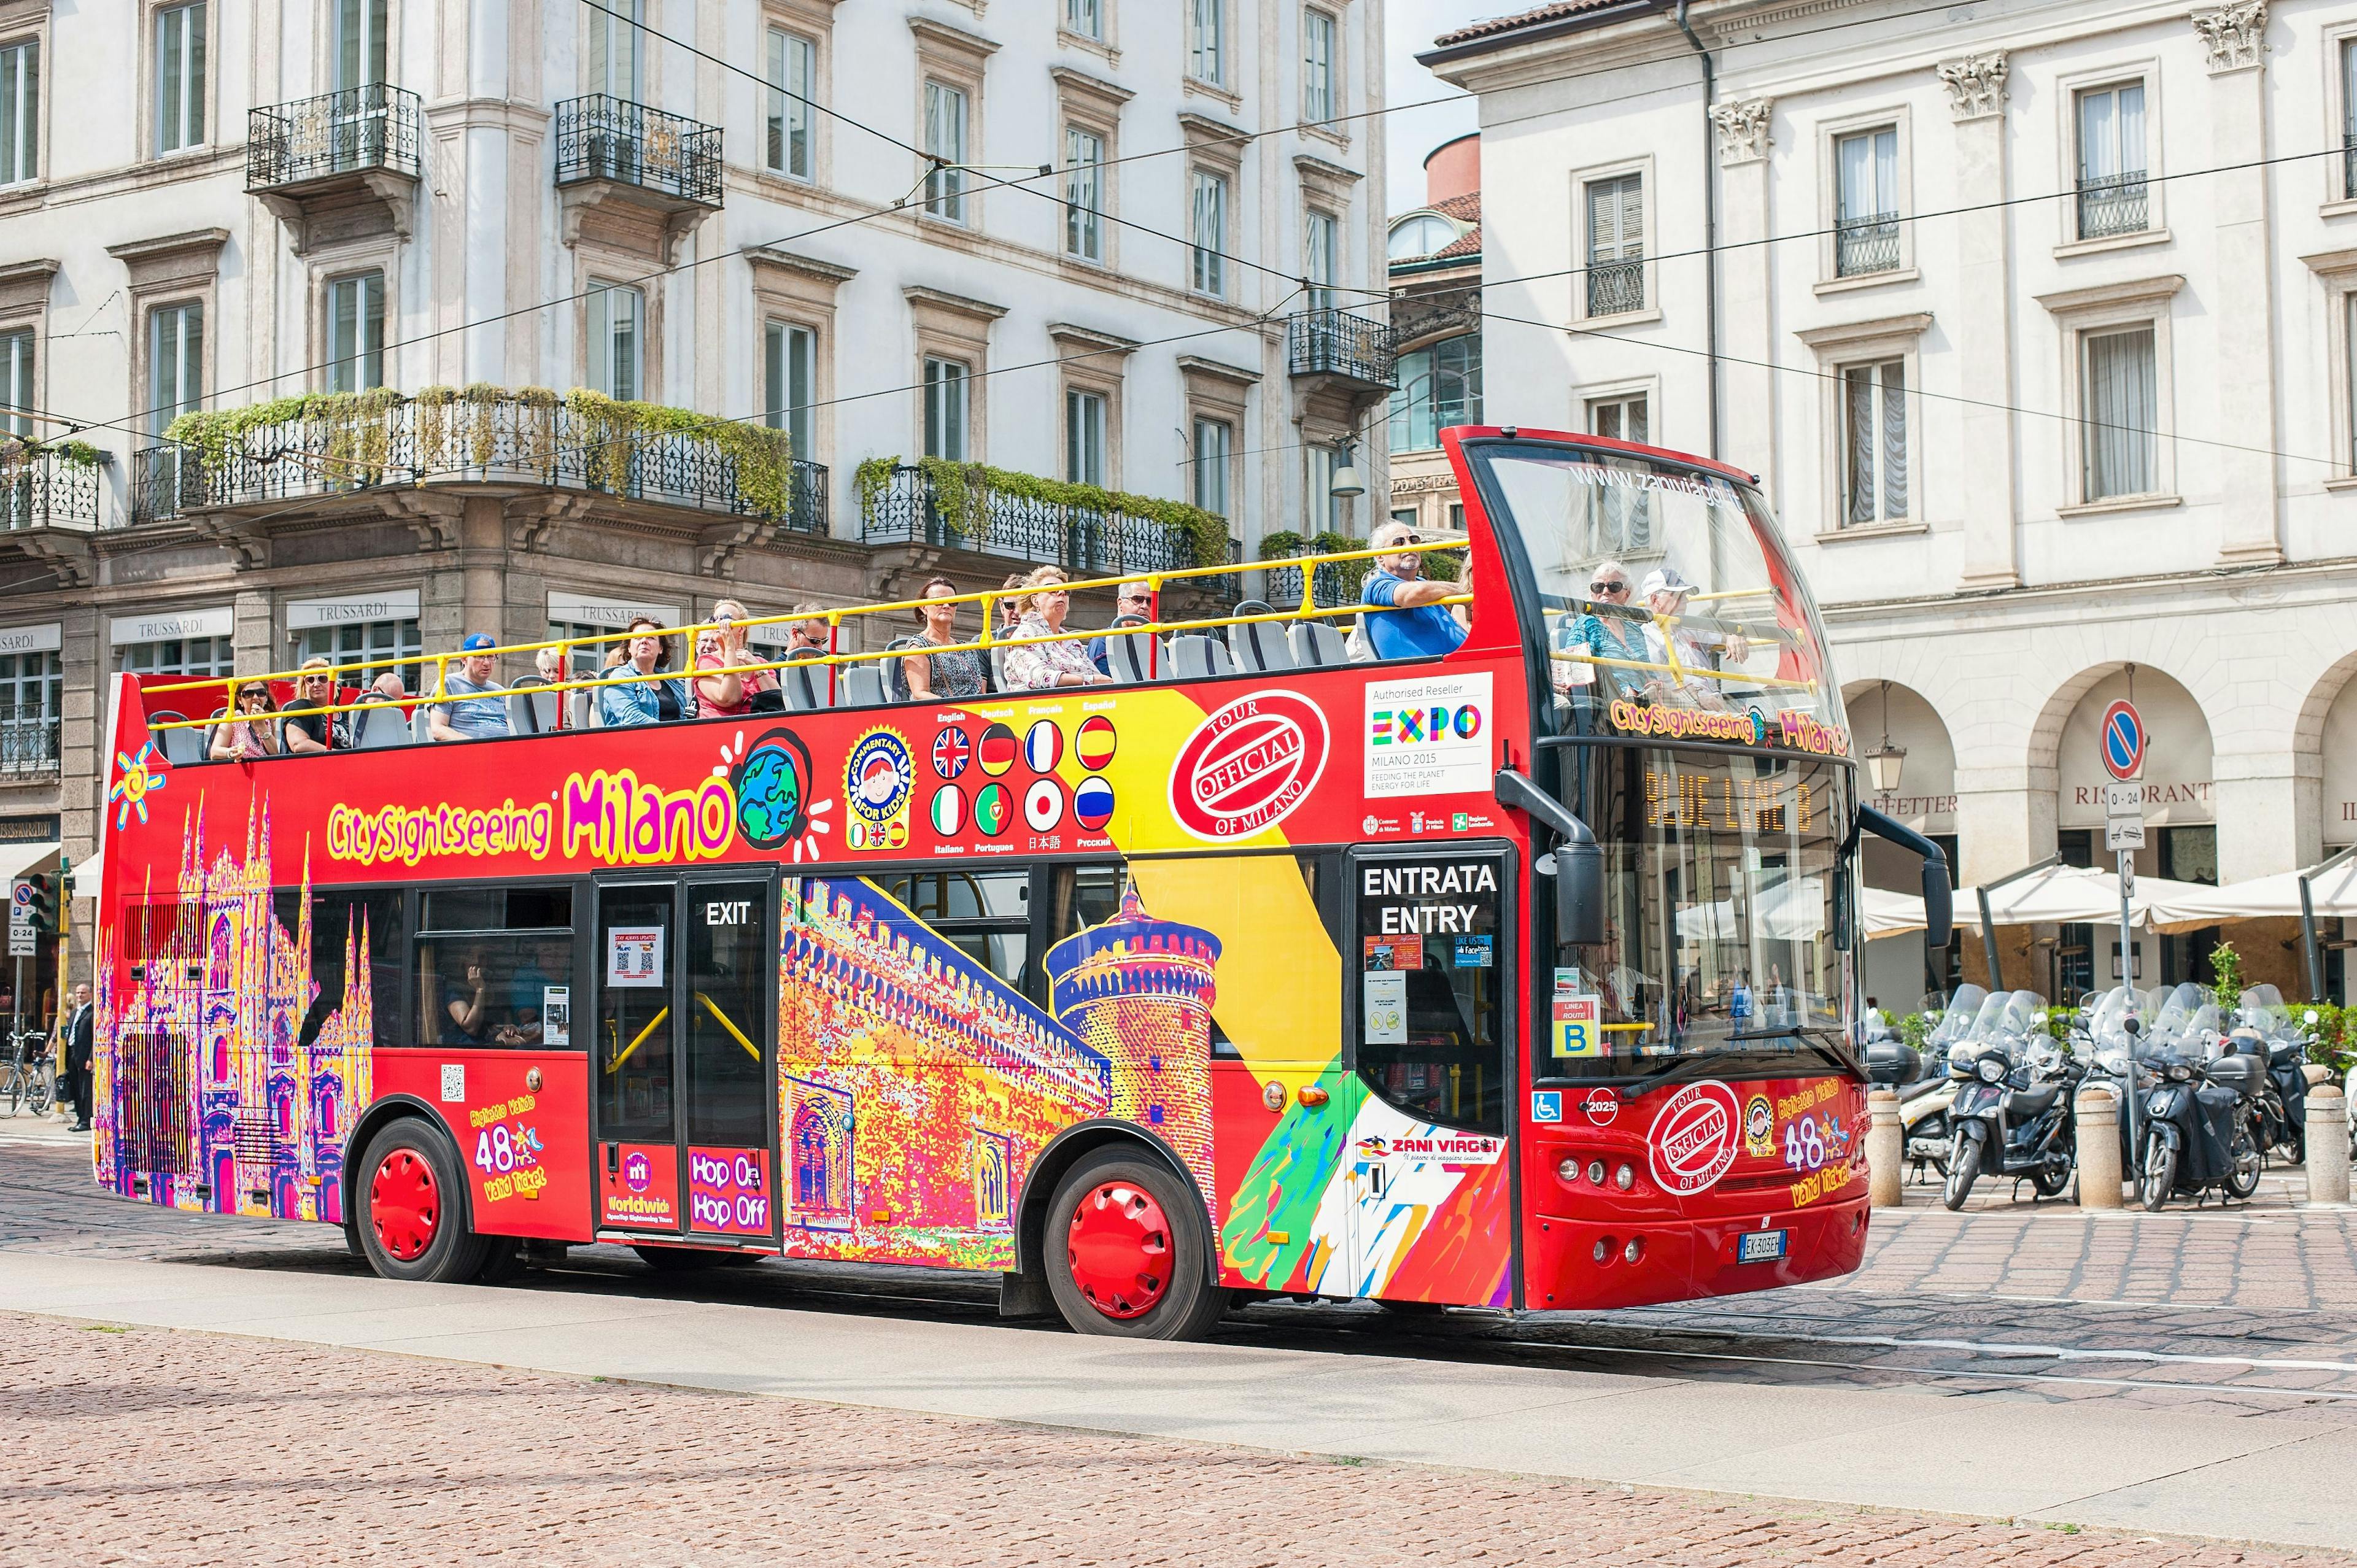 BEST TRAVEL TOURS WEBSITES AND APPS - CITY SIGHTSEEING - RATEPUNK